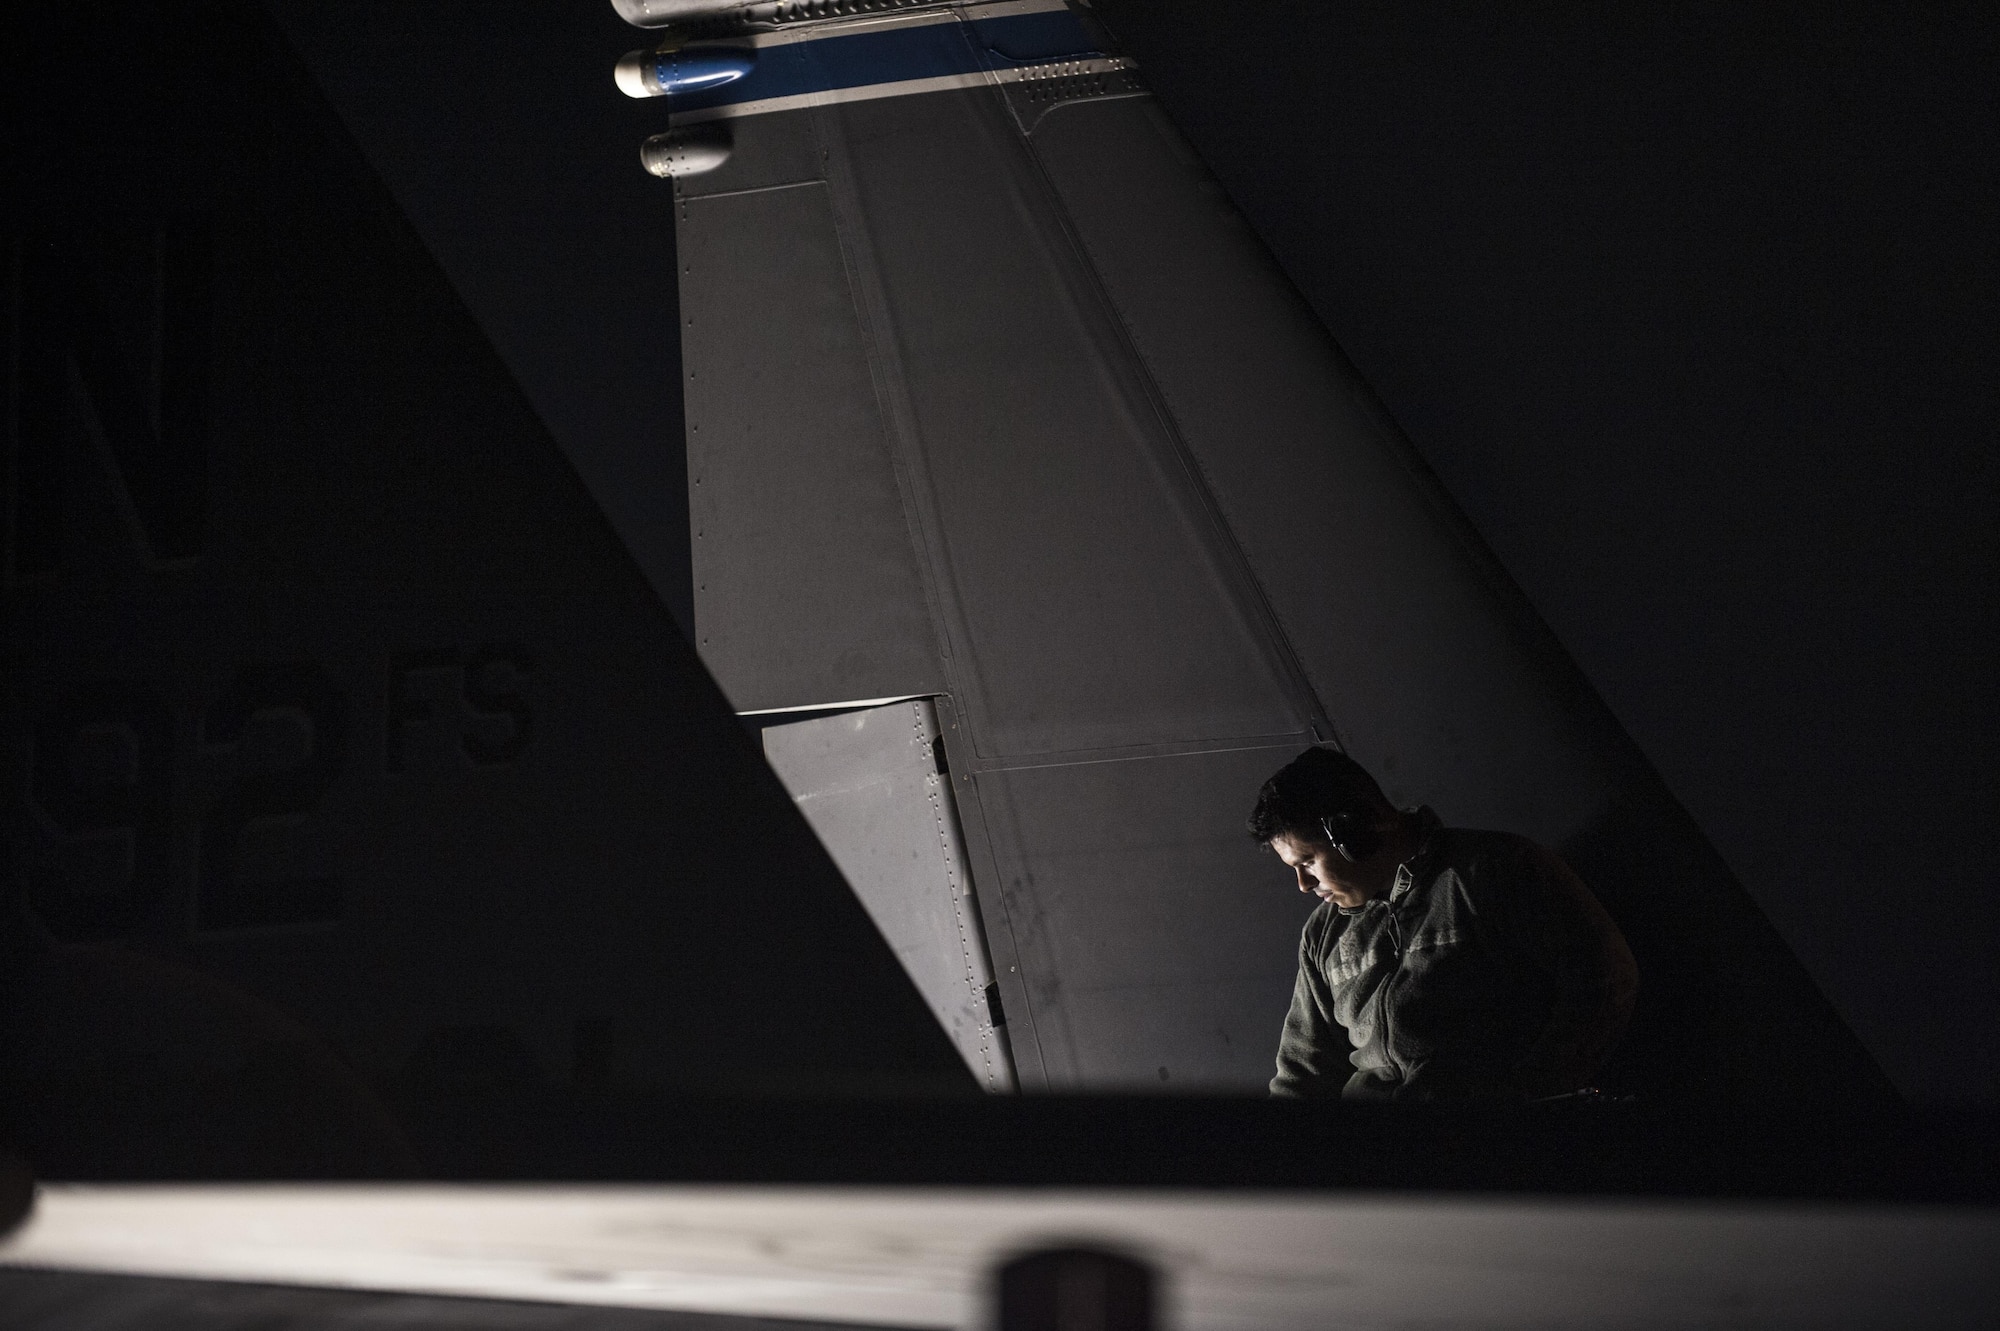 An aircraft maintainer from the 332nd Expeditionary Maintenance Squadron performs pre-flight checks on an F-15E Strike Eagle prior to an early-morning takeoff October 4, 2017, at an undisclosed location in Southwest Asia. During their time in the region, maintenance Airmen were responsible for generating hundreds of combat sorties per month.